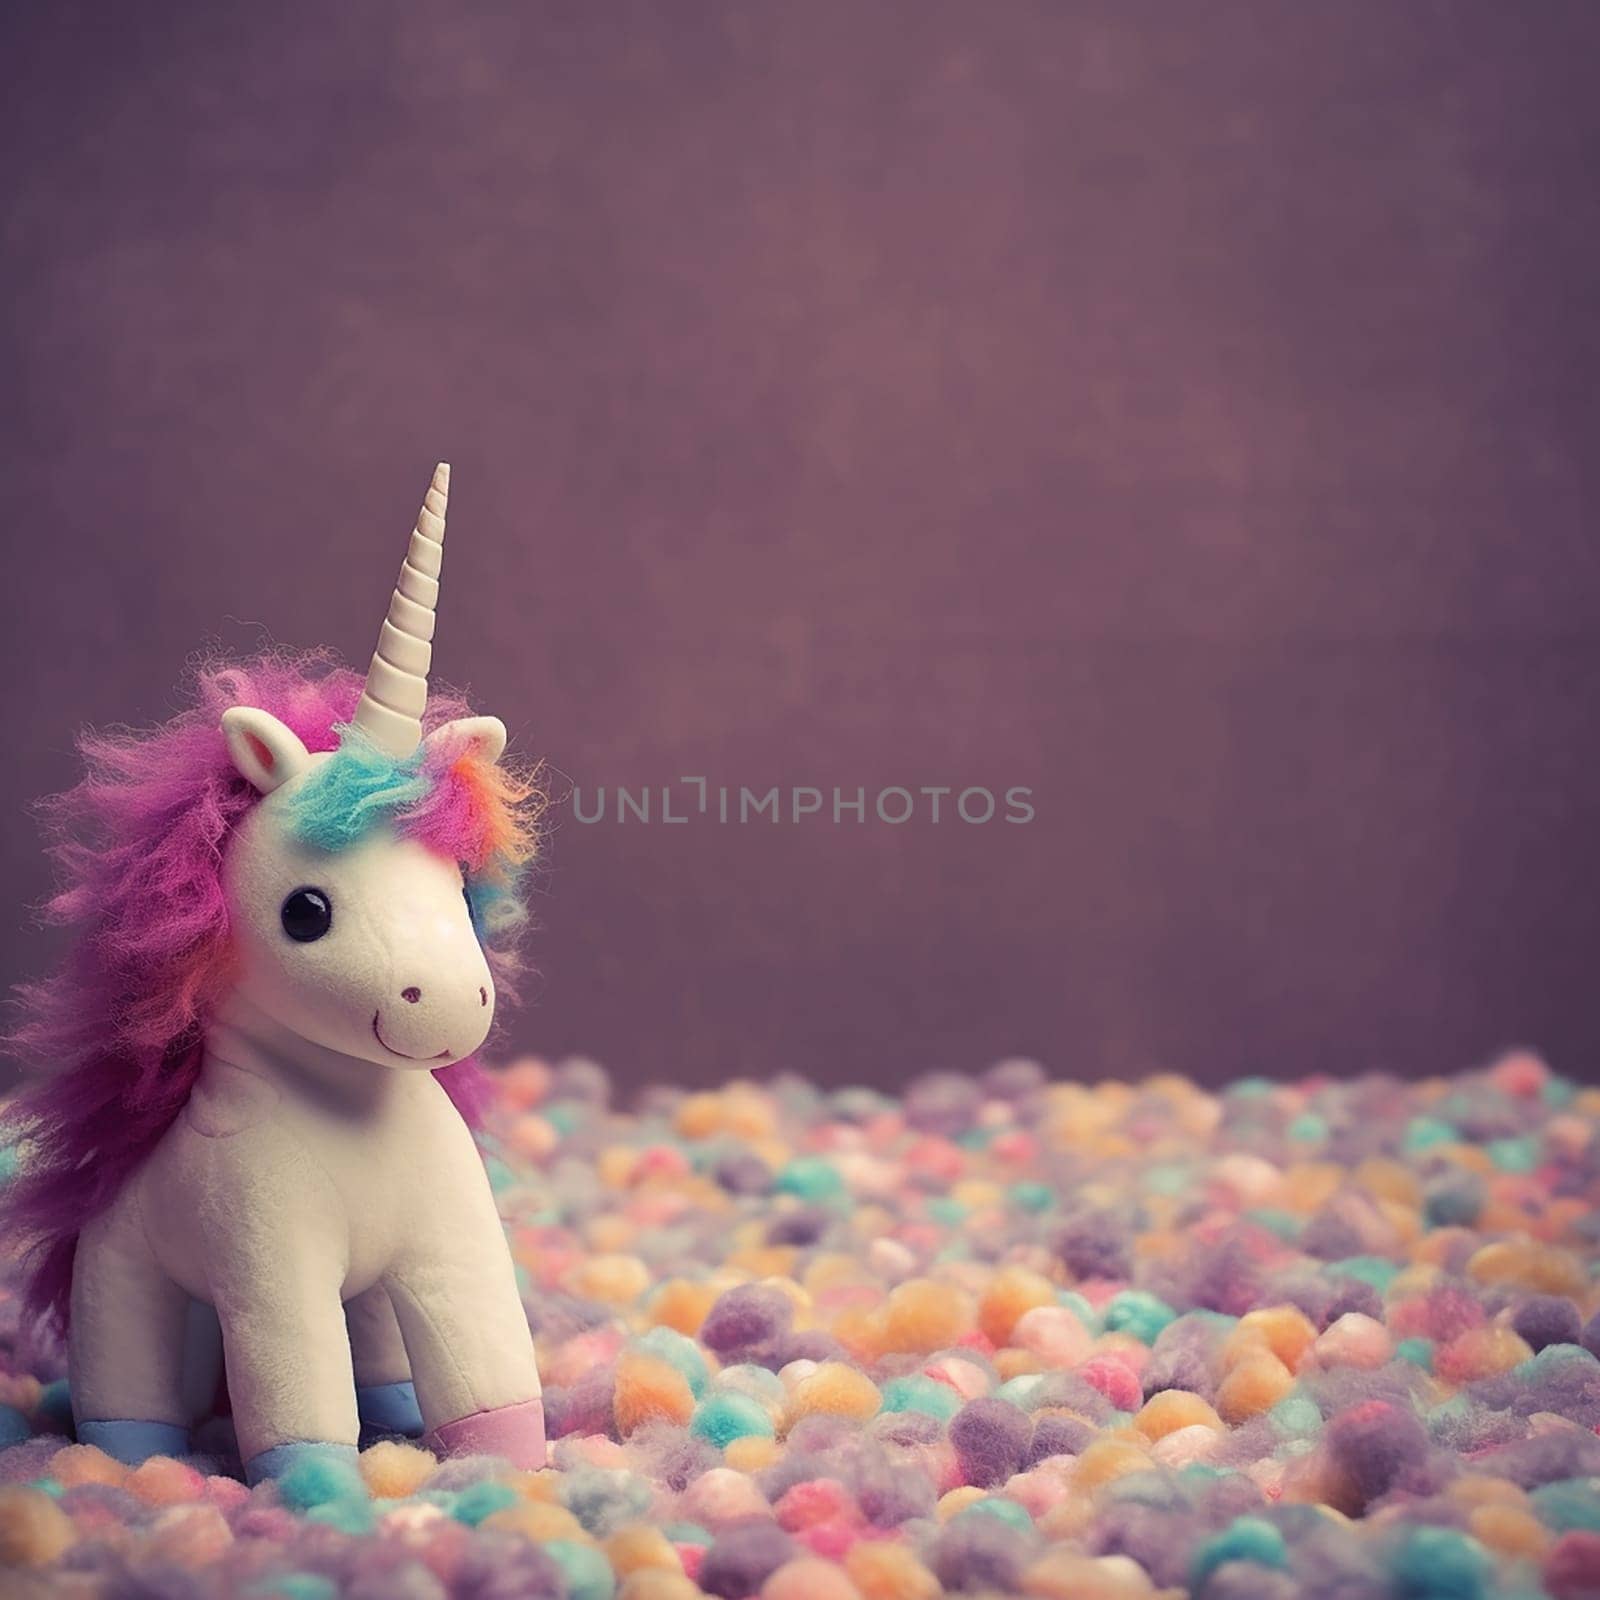 Toy unicorn on a colorful background of soft, pastel beads.